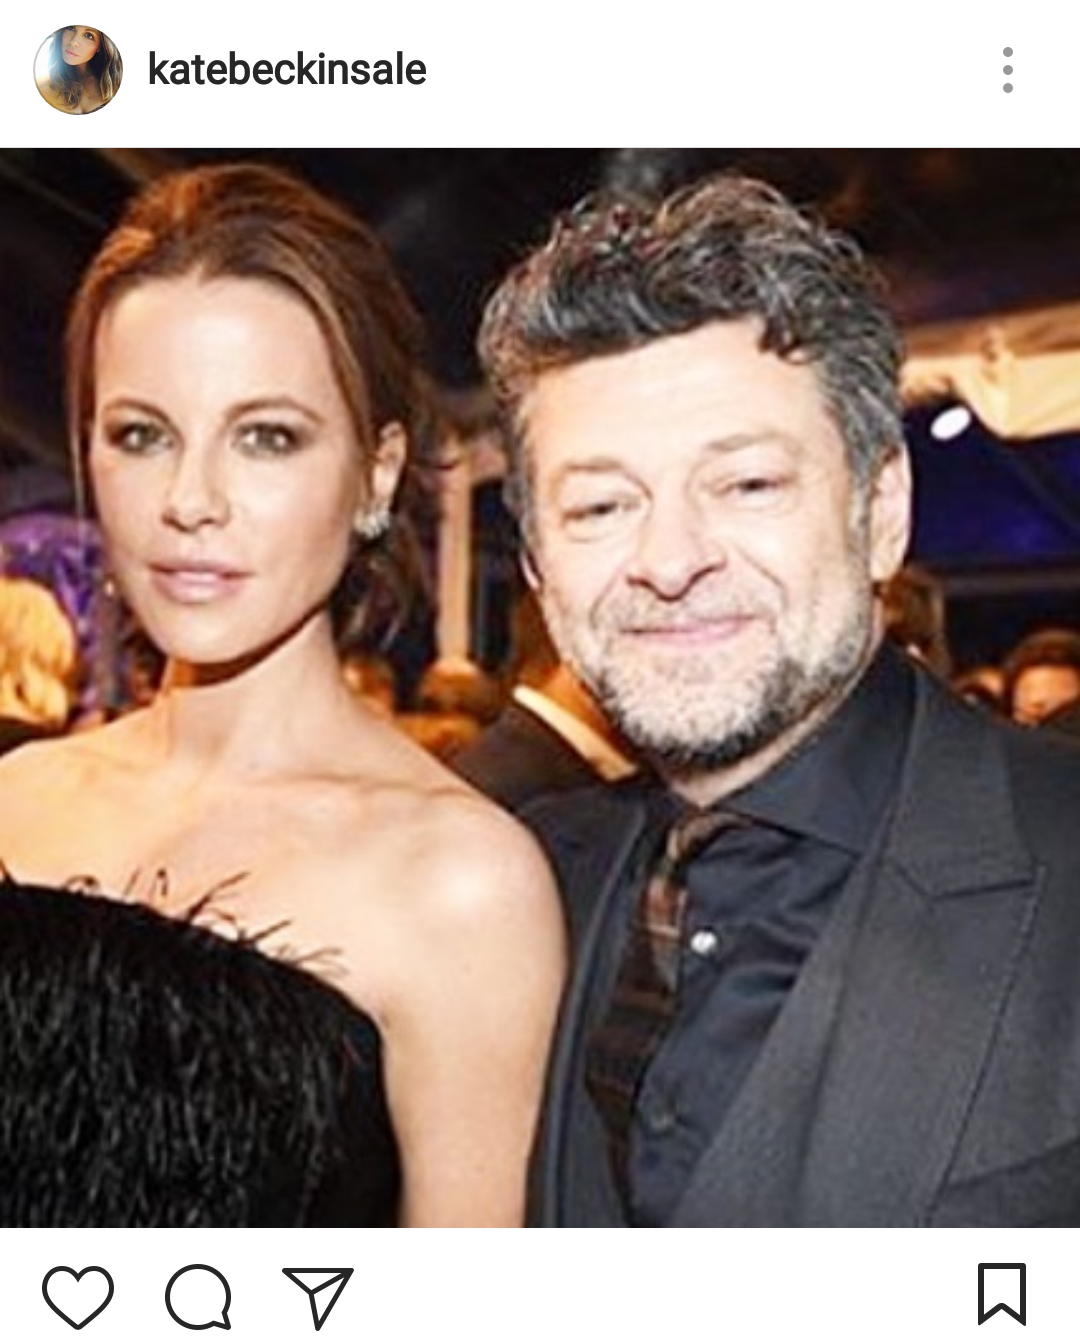 Funny case - Kate Beckinsale, Michael Sheen, Andy Serkis, Similarity, Celebrities